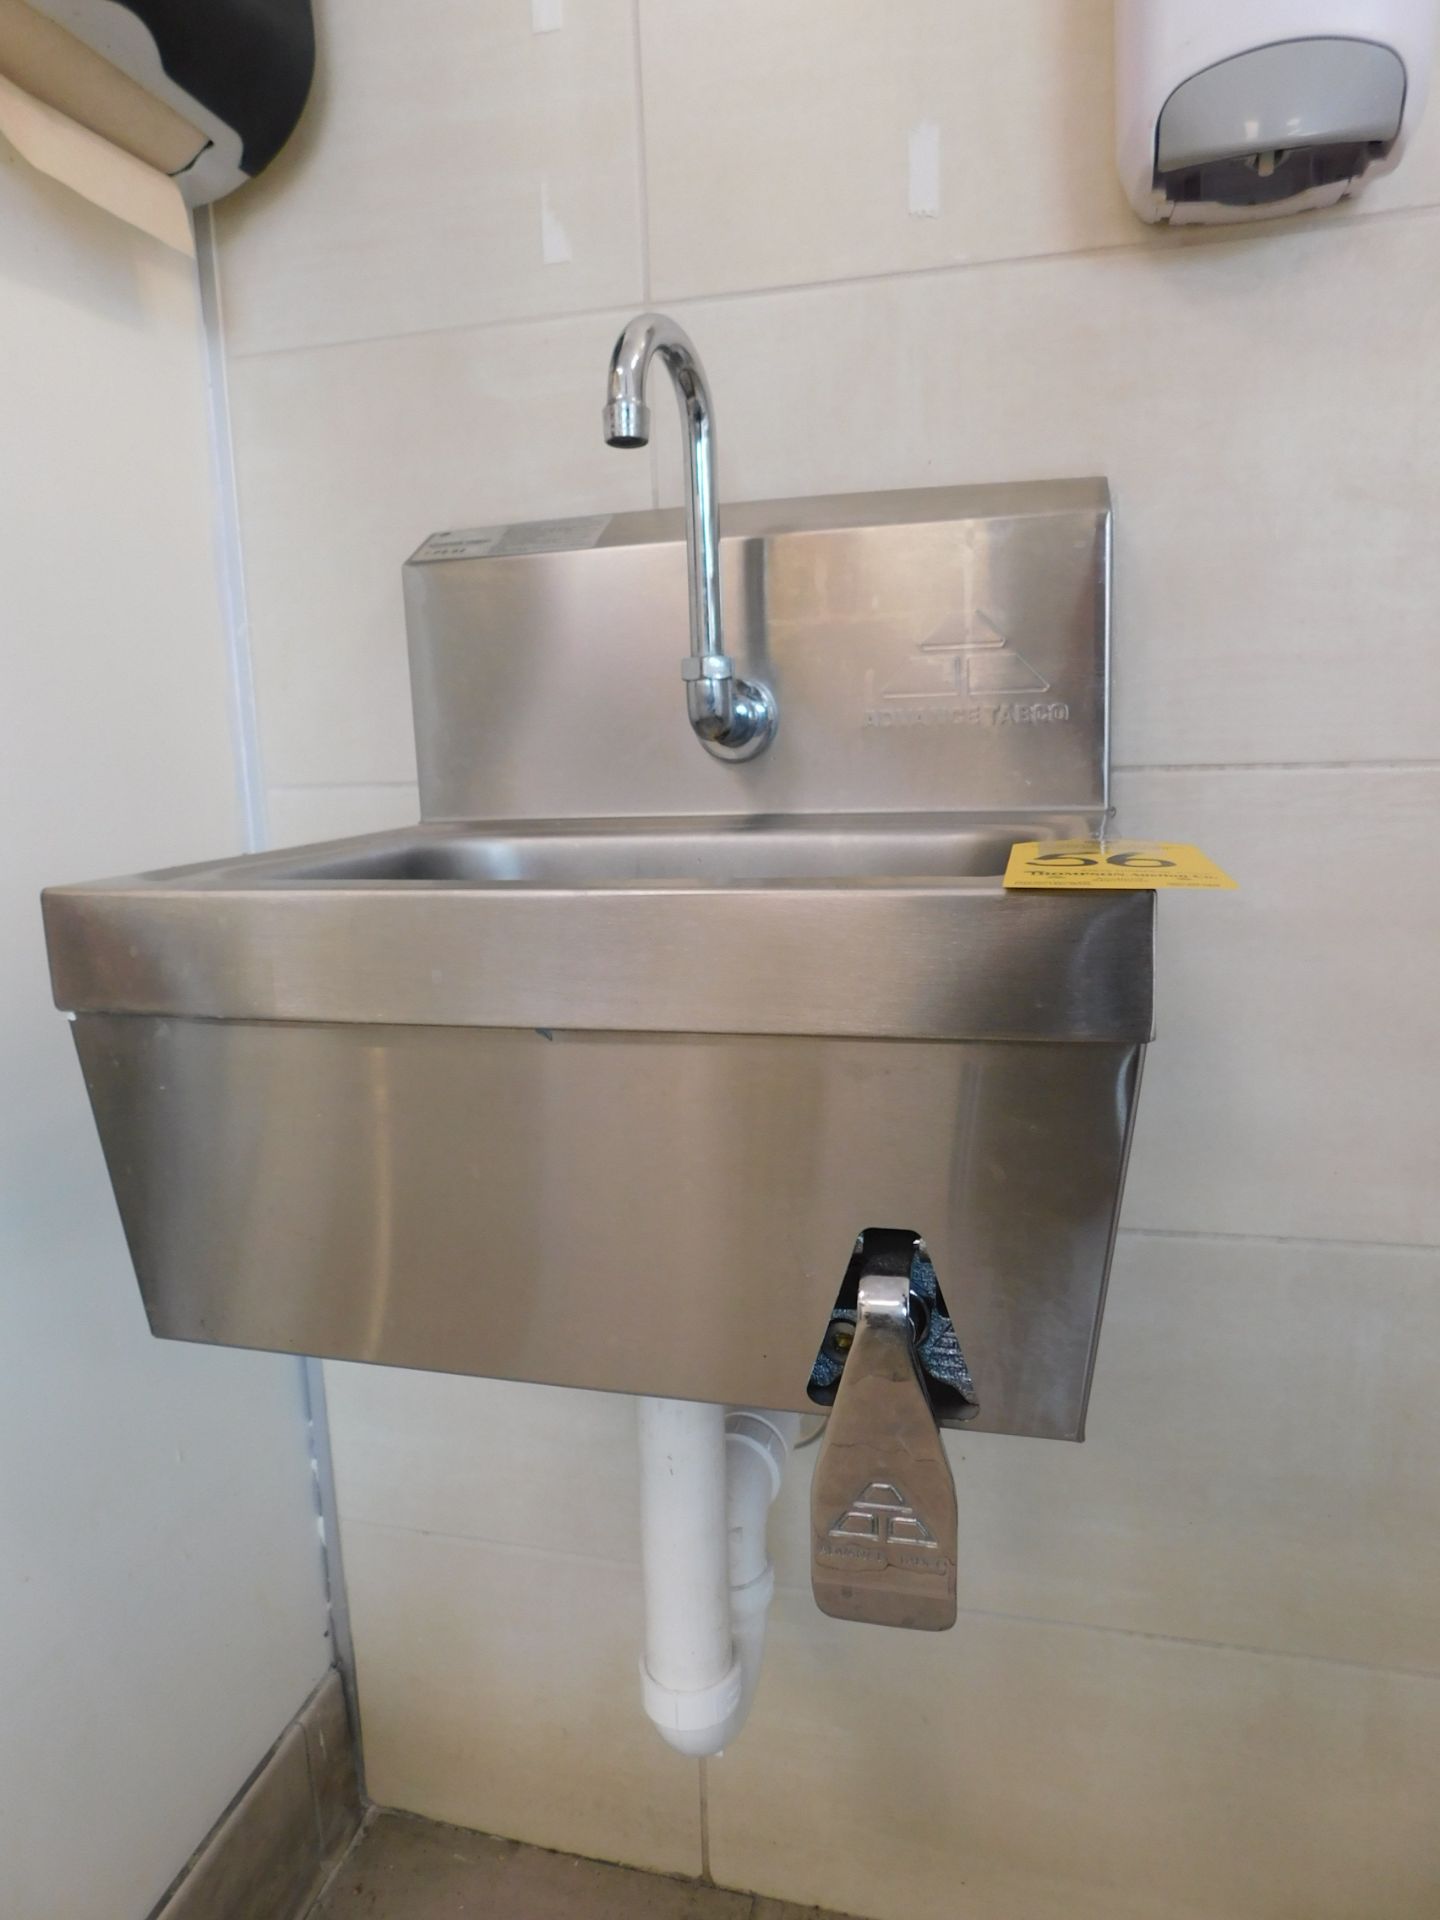 Advance Tabco Model 7-PS-62 Hands Free Hand Sink with Towel and Soap Dispensers - Image 3 of 6